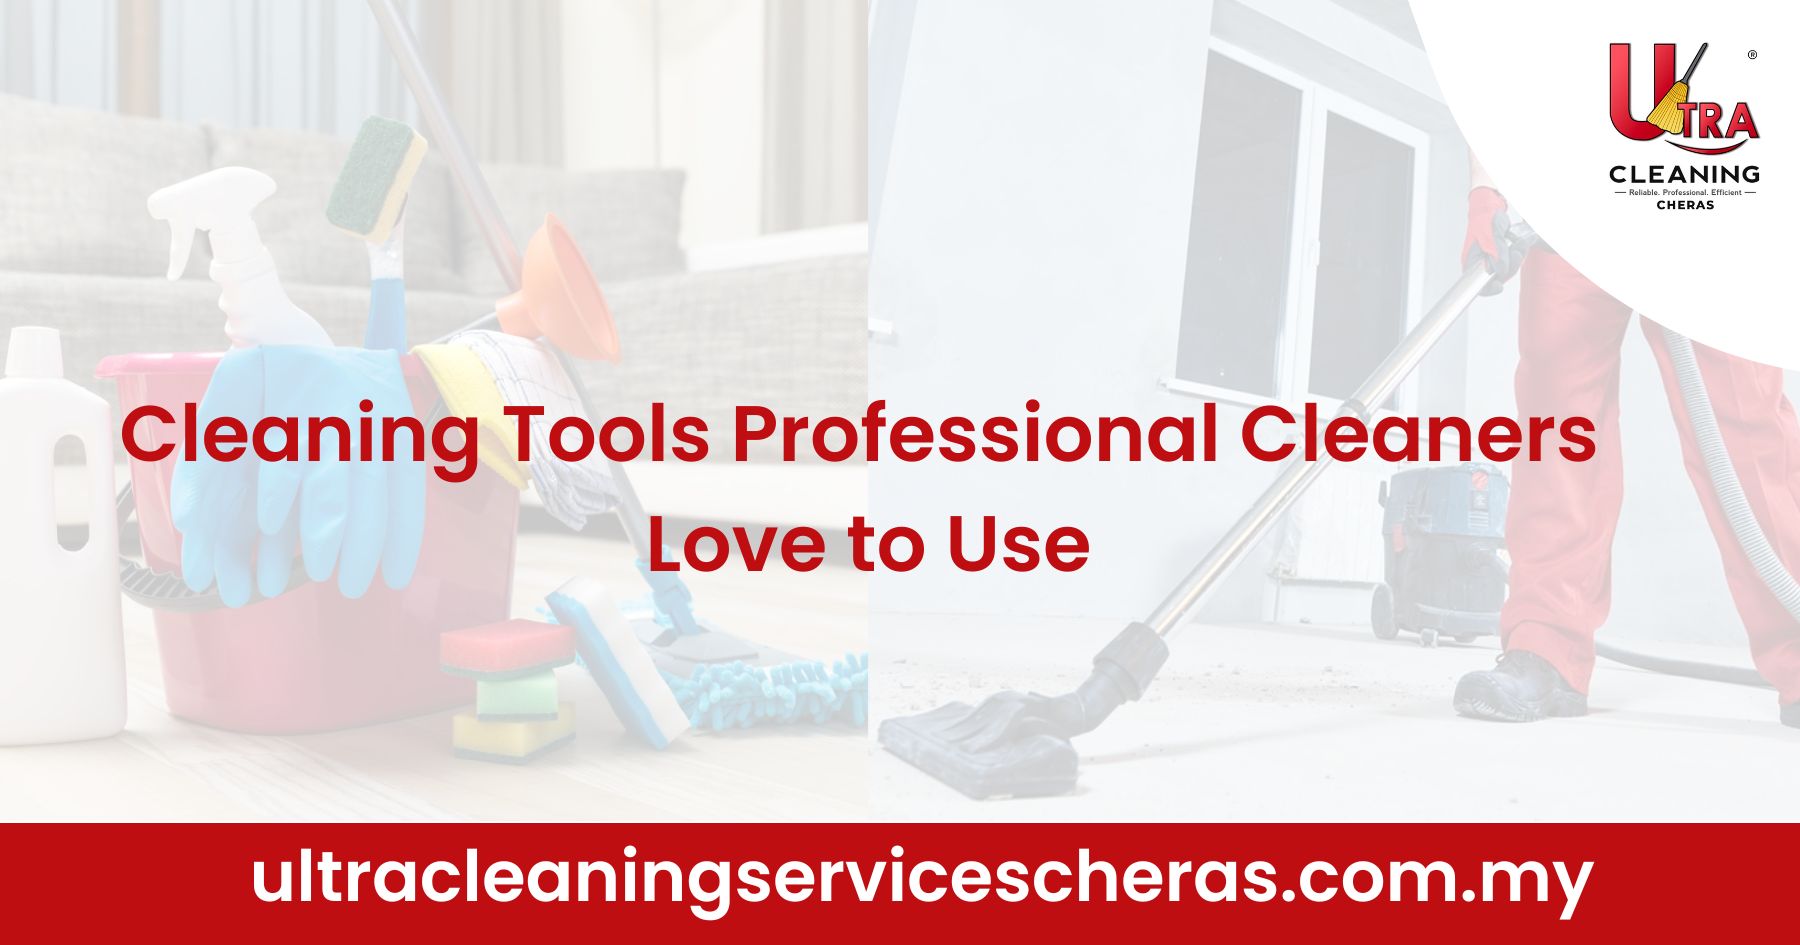 Cleaning Tools Professional Cleaners Love to Use